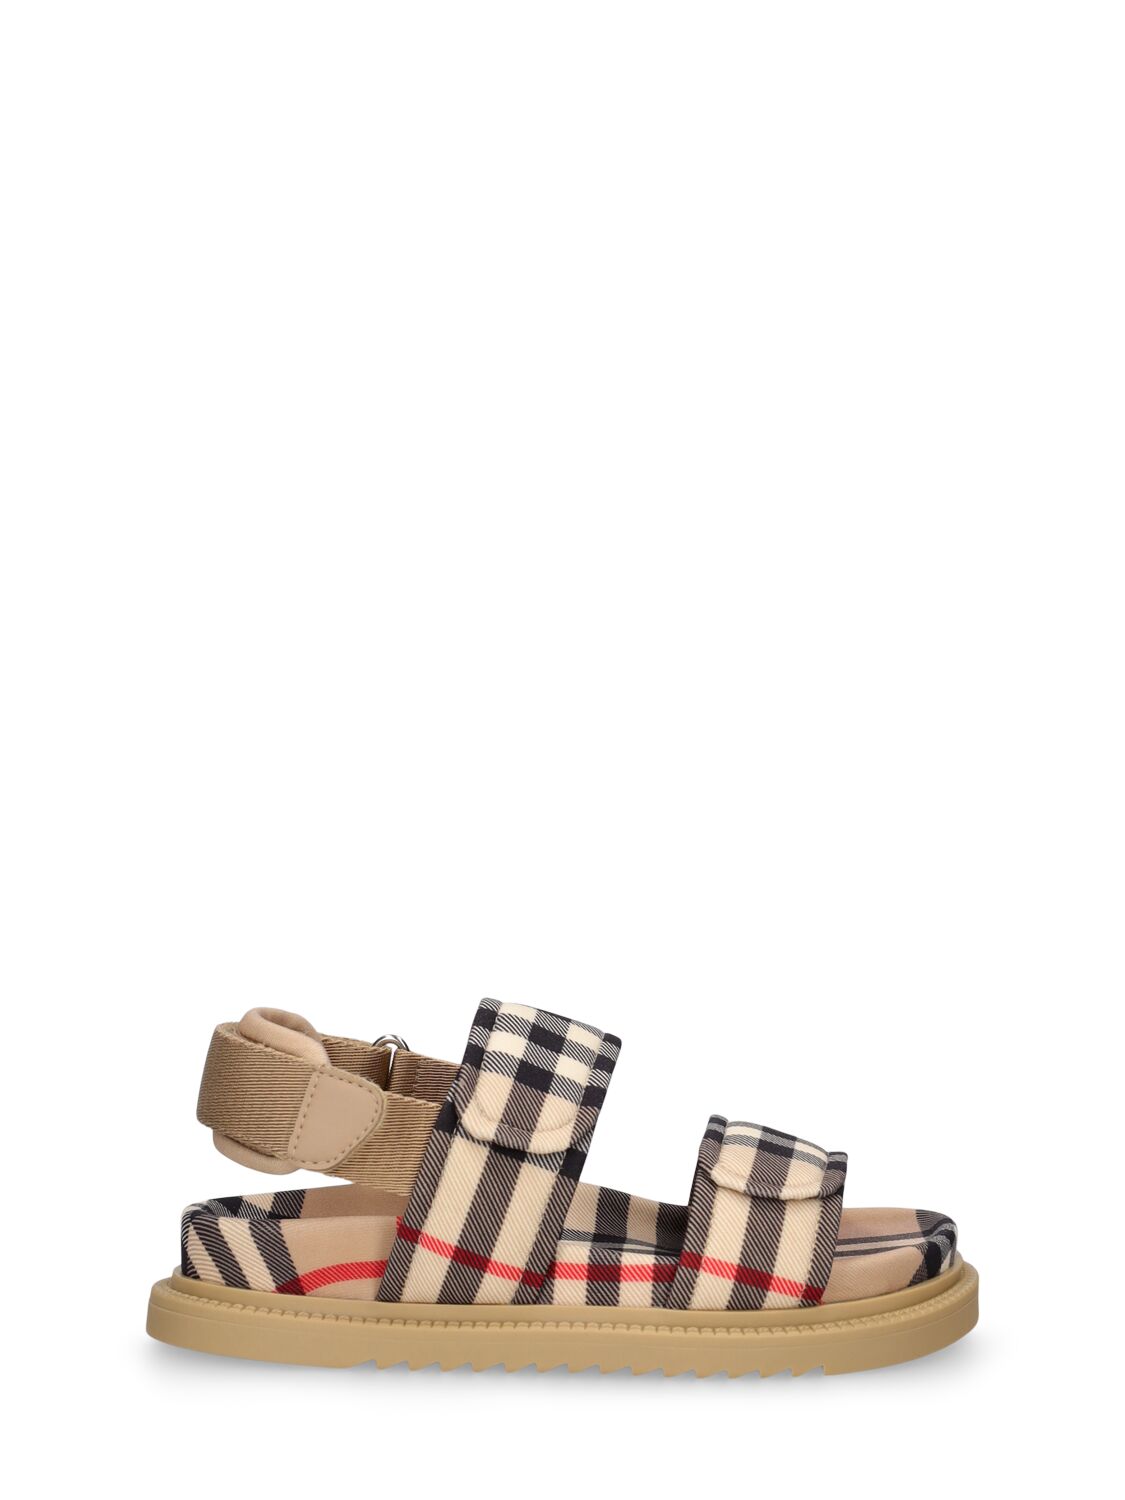 Image of Check Print Sandals W/straps